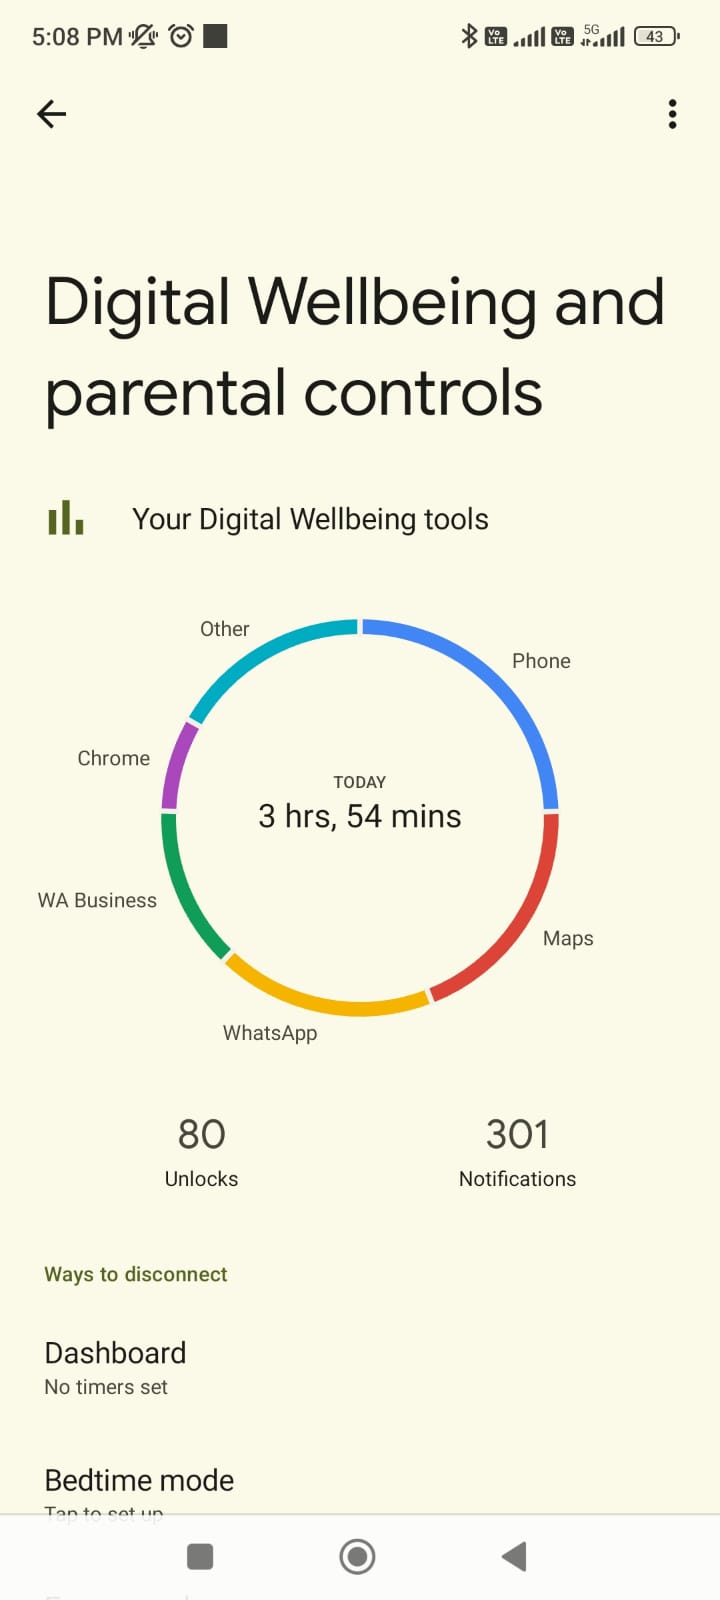 Your digital wellbeing tool